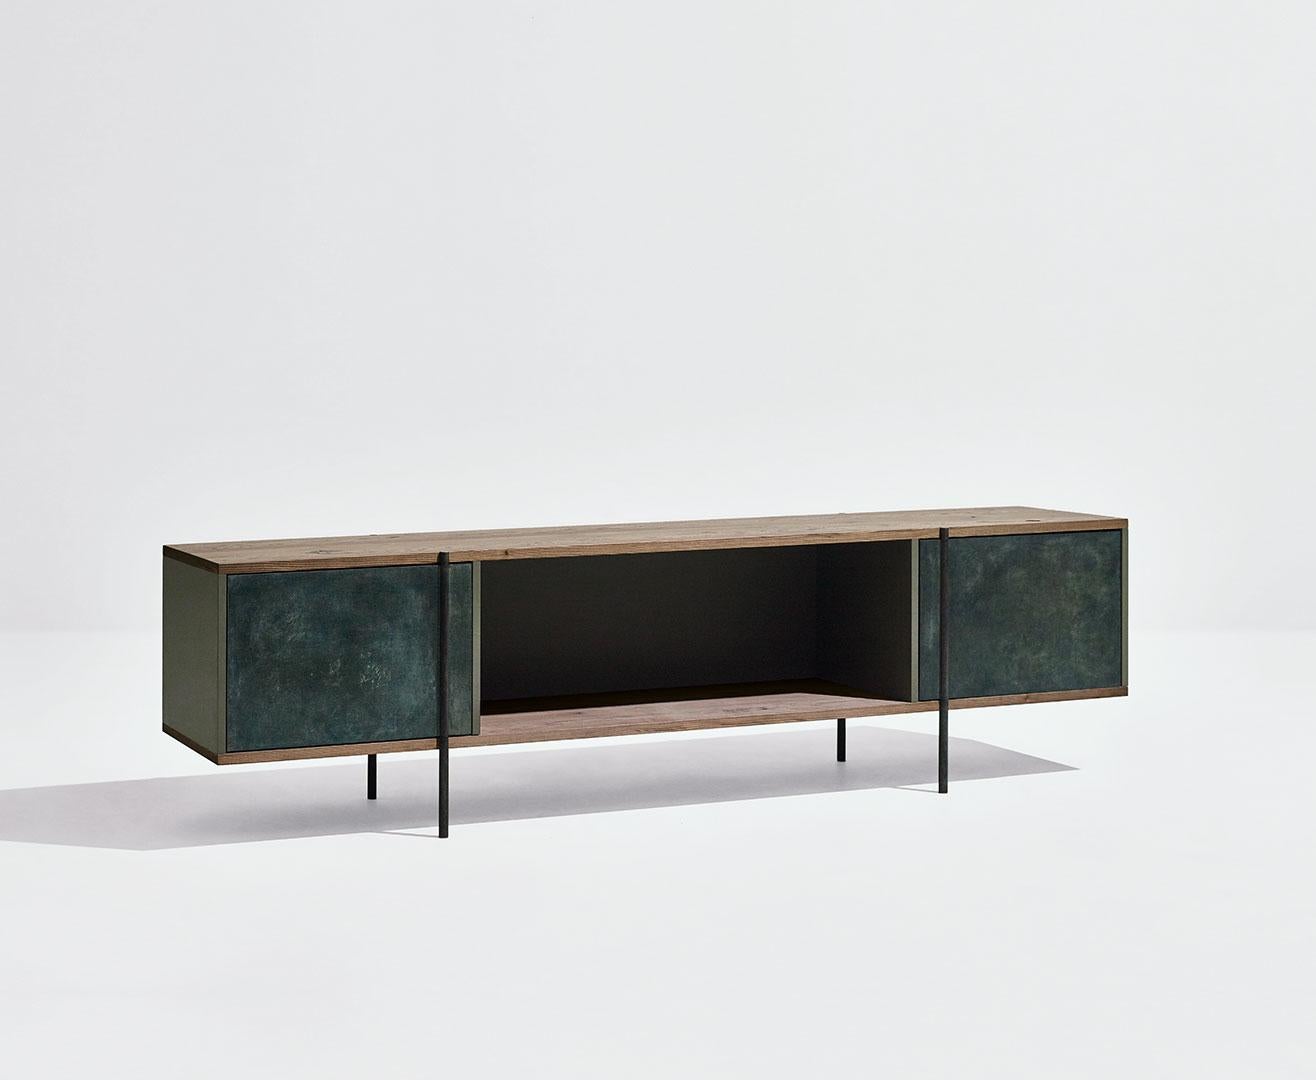 Pivot sideboard by SEM
Dimensions: W200 x D38 x H52.2 cm
Material: metallic tubolar structure, pivoting doors in surface in antique brass or patinas, Shelves in fossil elm or Canaletto walnut, Side and back panels in matt painted MDF.
Available